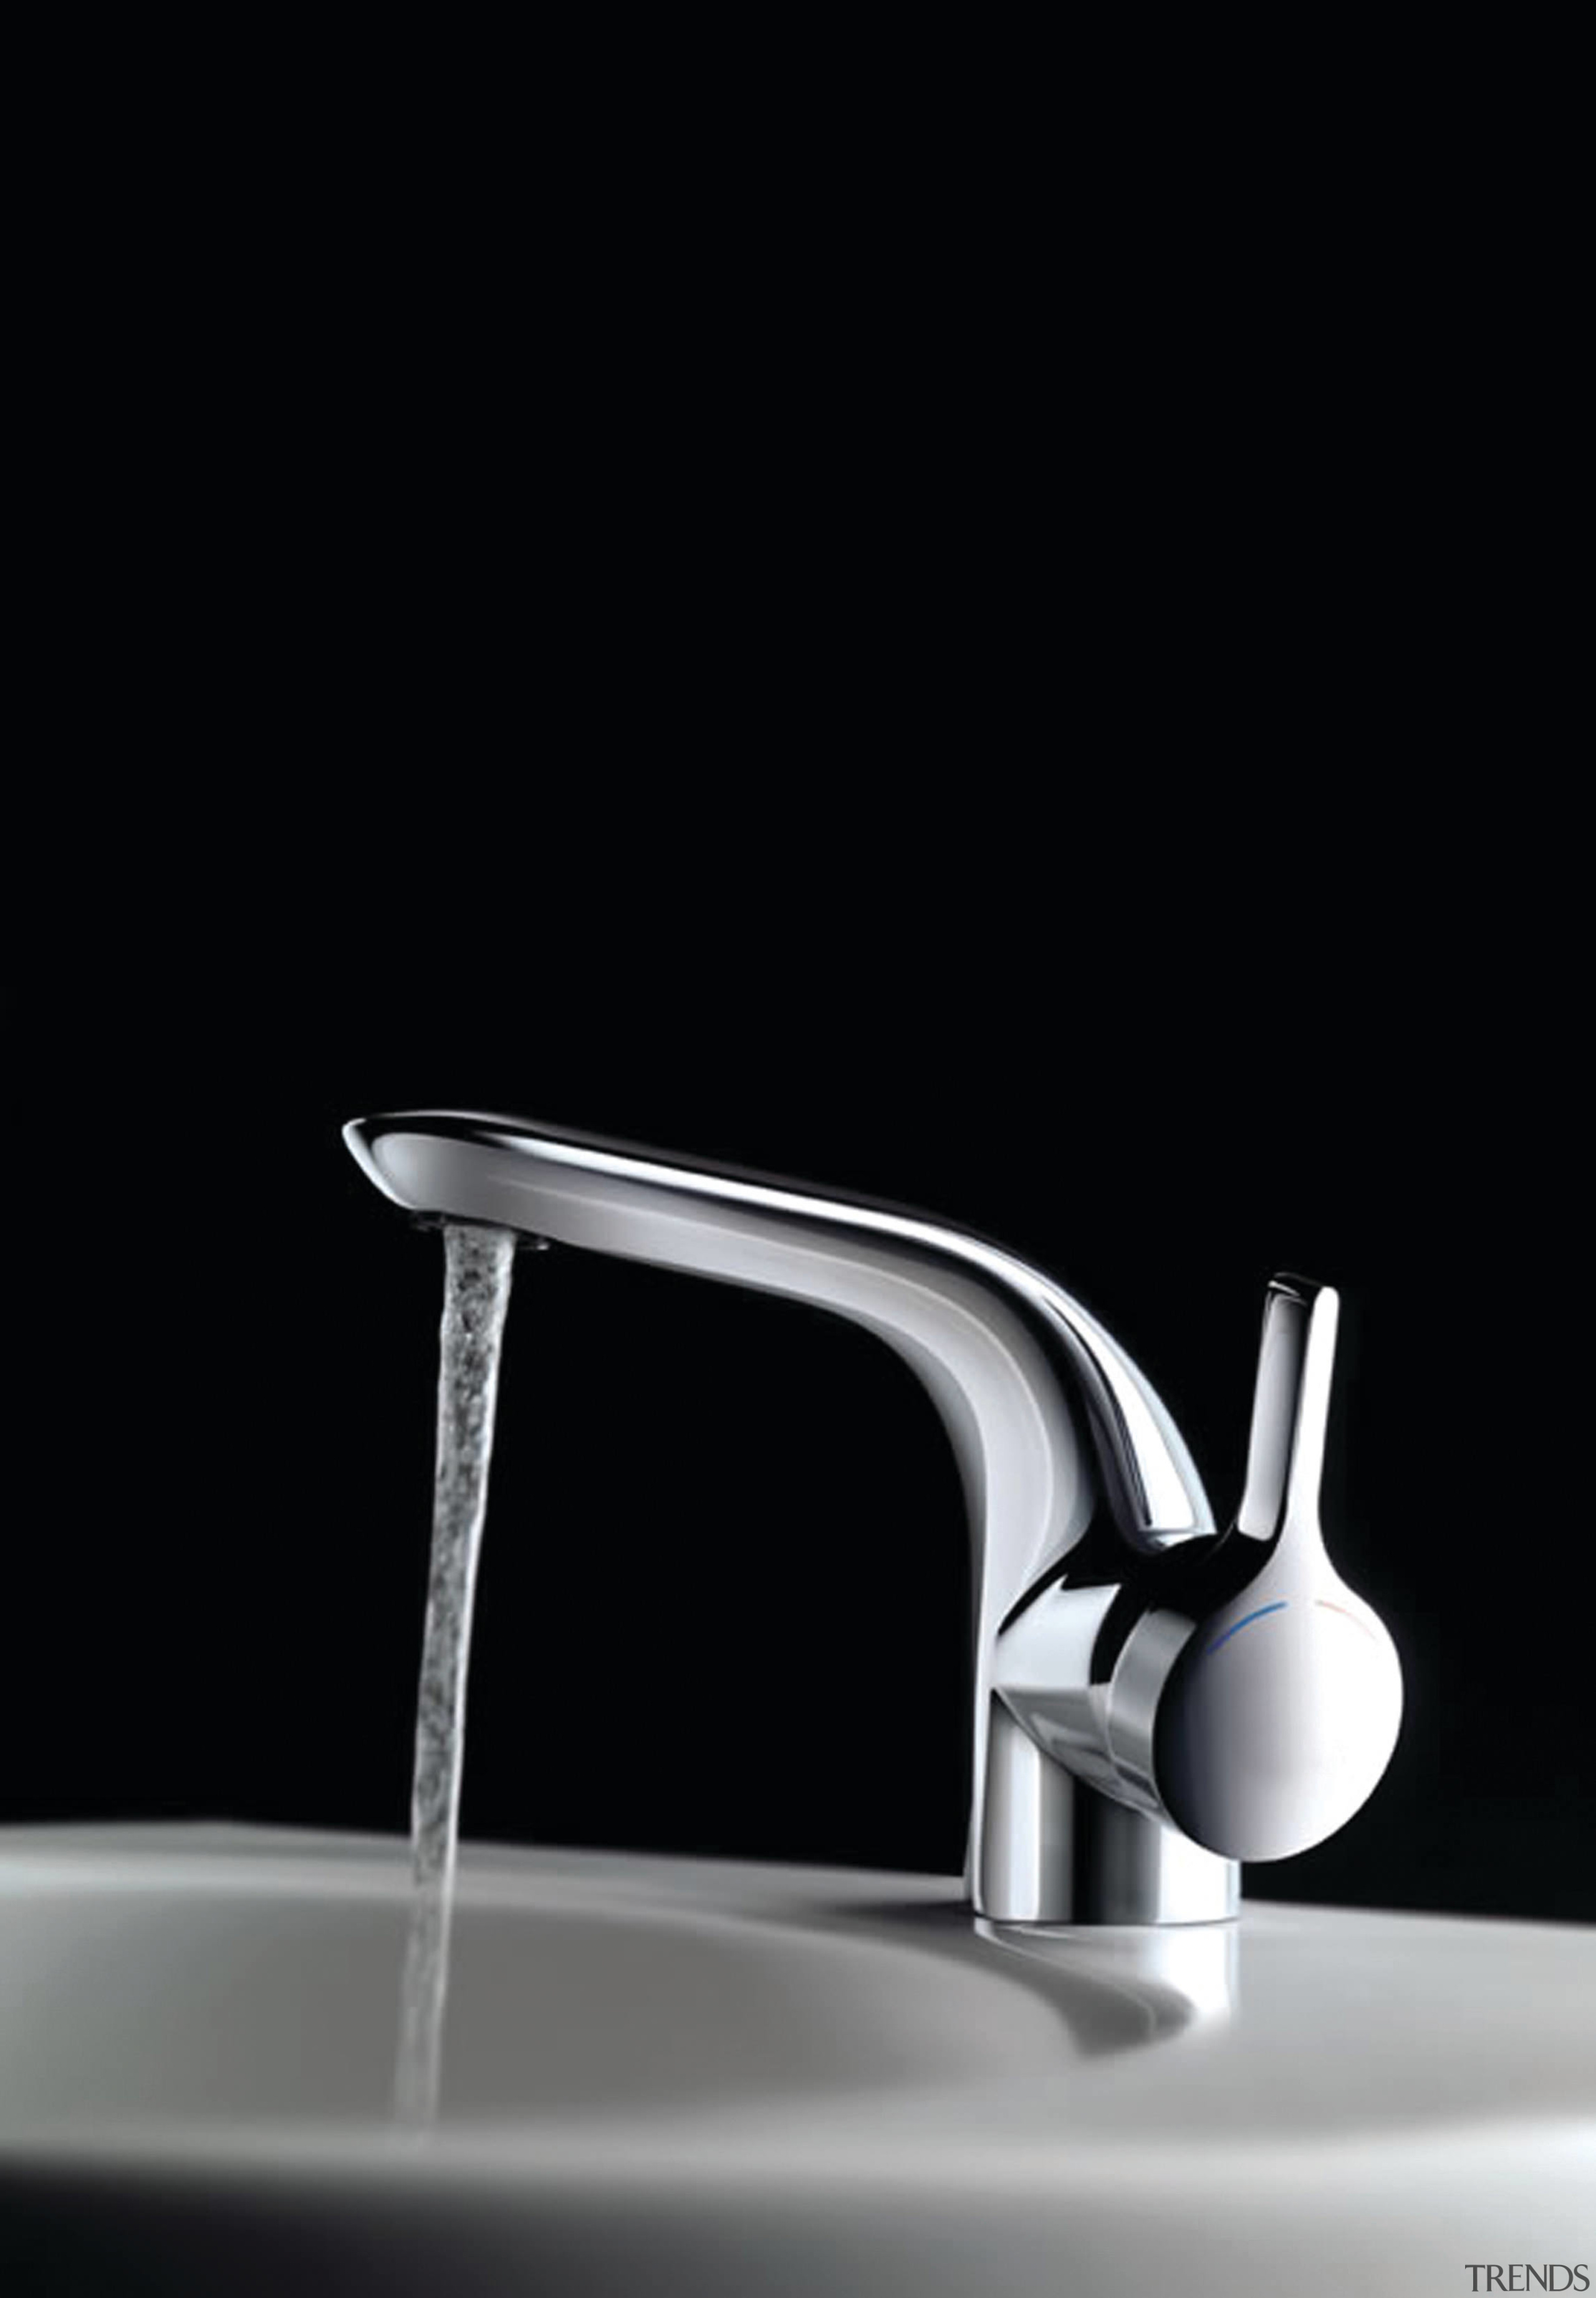 Melange basin mixer from Ideal Standard available from black and white, monochrome, plumbing fixture, product, product design, still life photography, table, tap, black